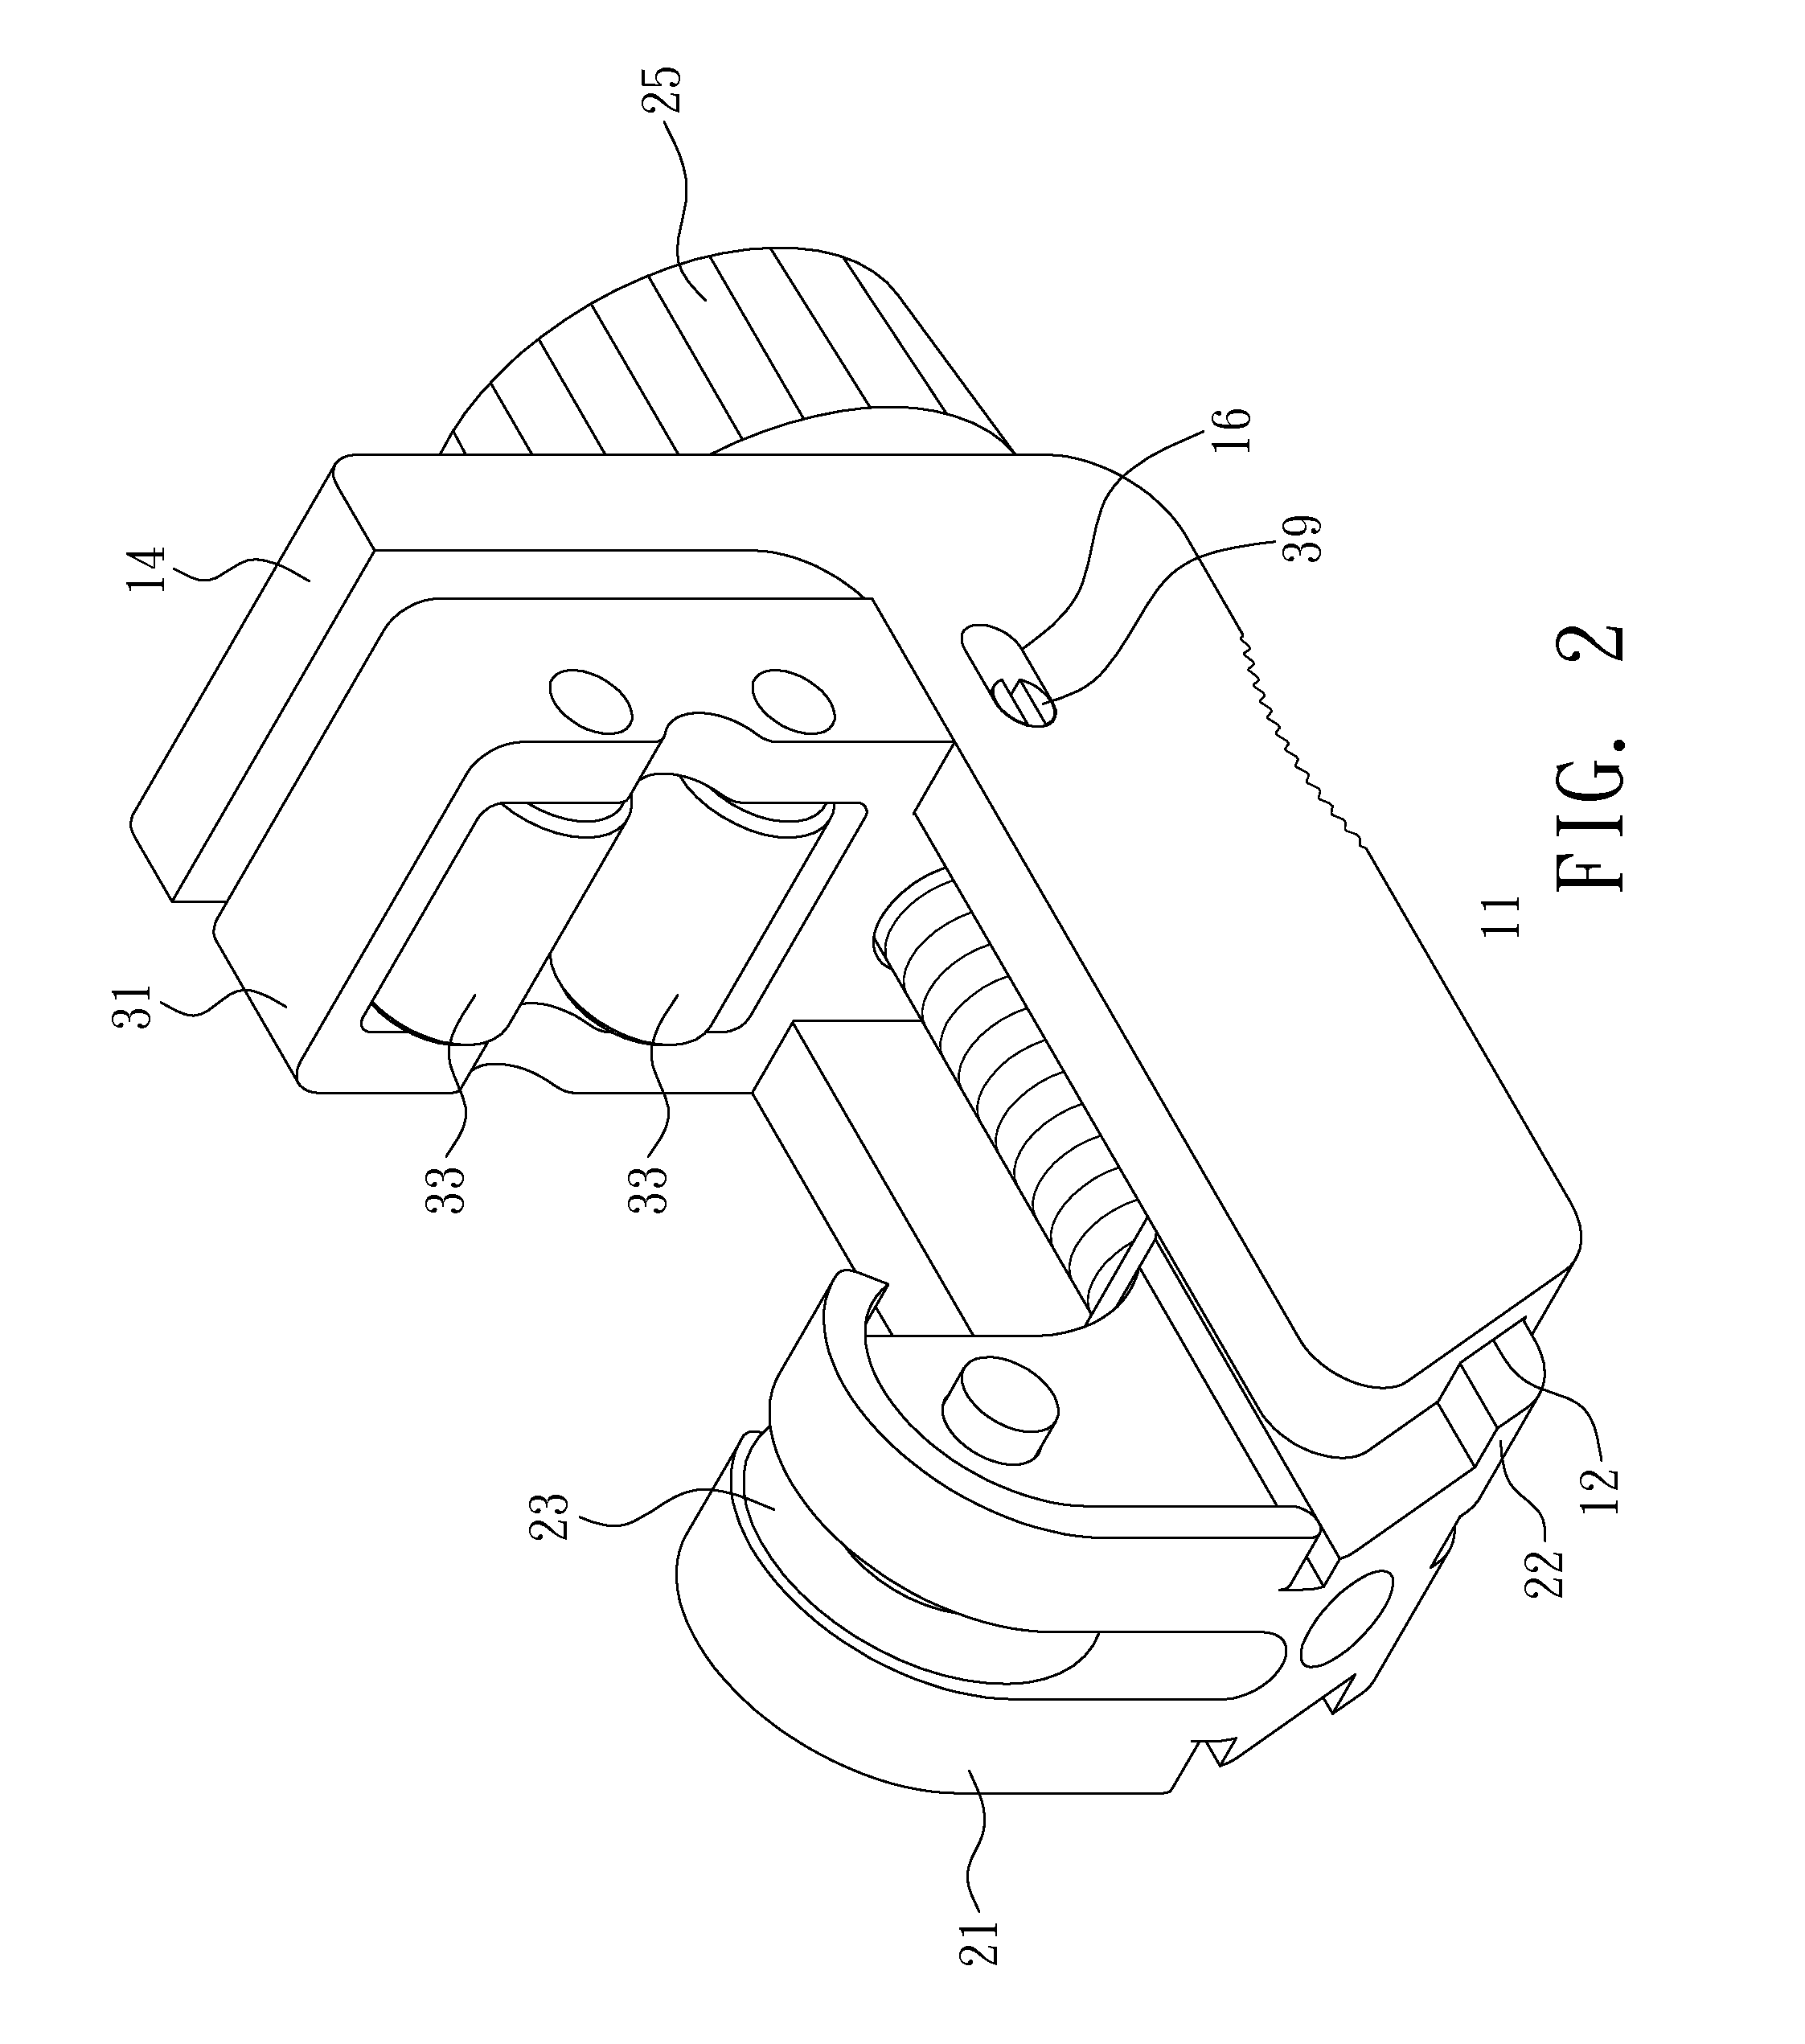 Structure of a Cutting Tool